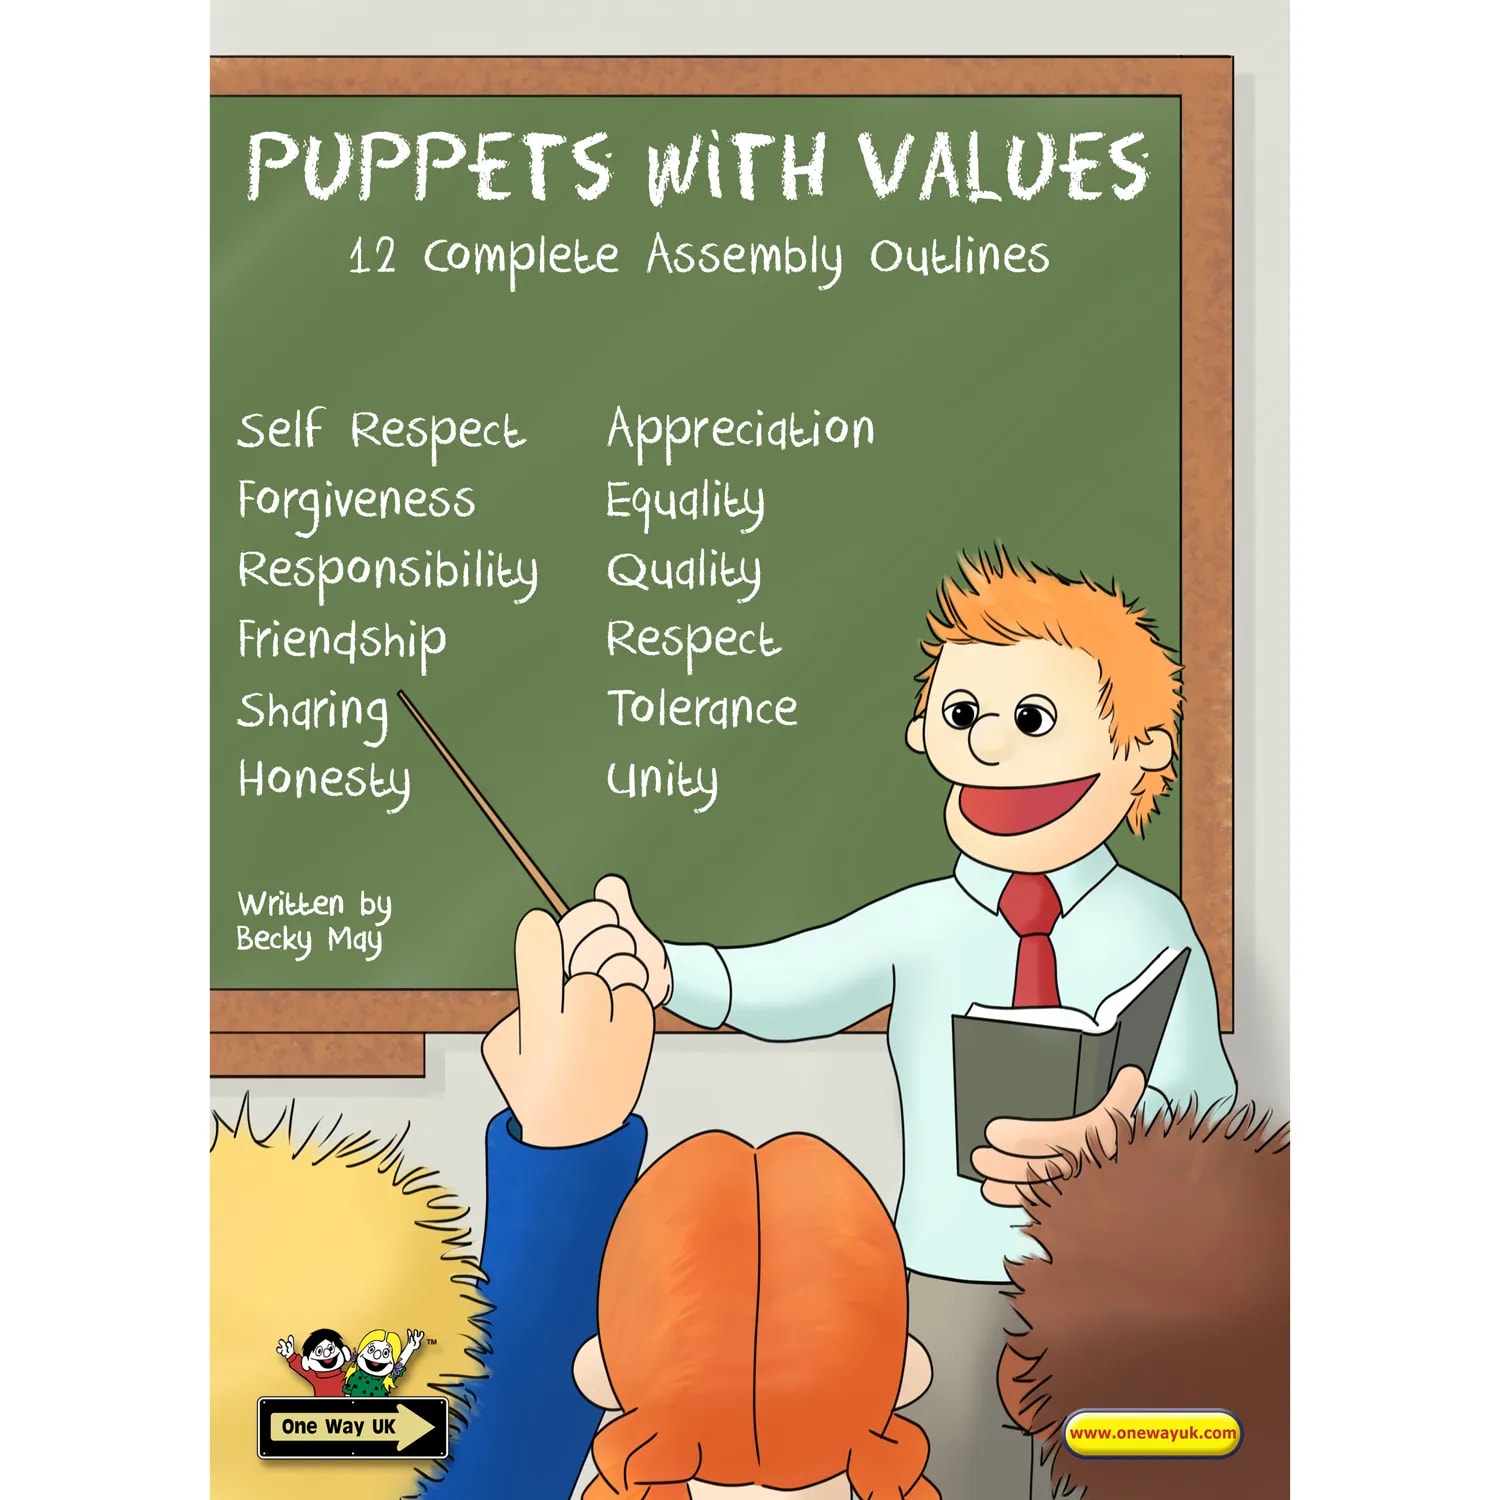 Puppets with Values - 12 Complete Assembly Outlines